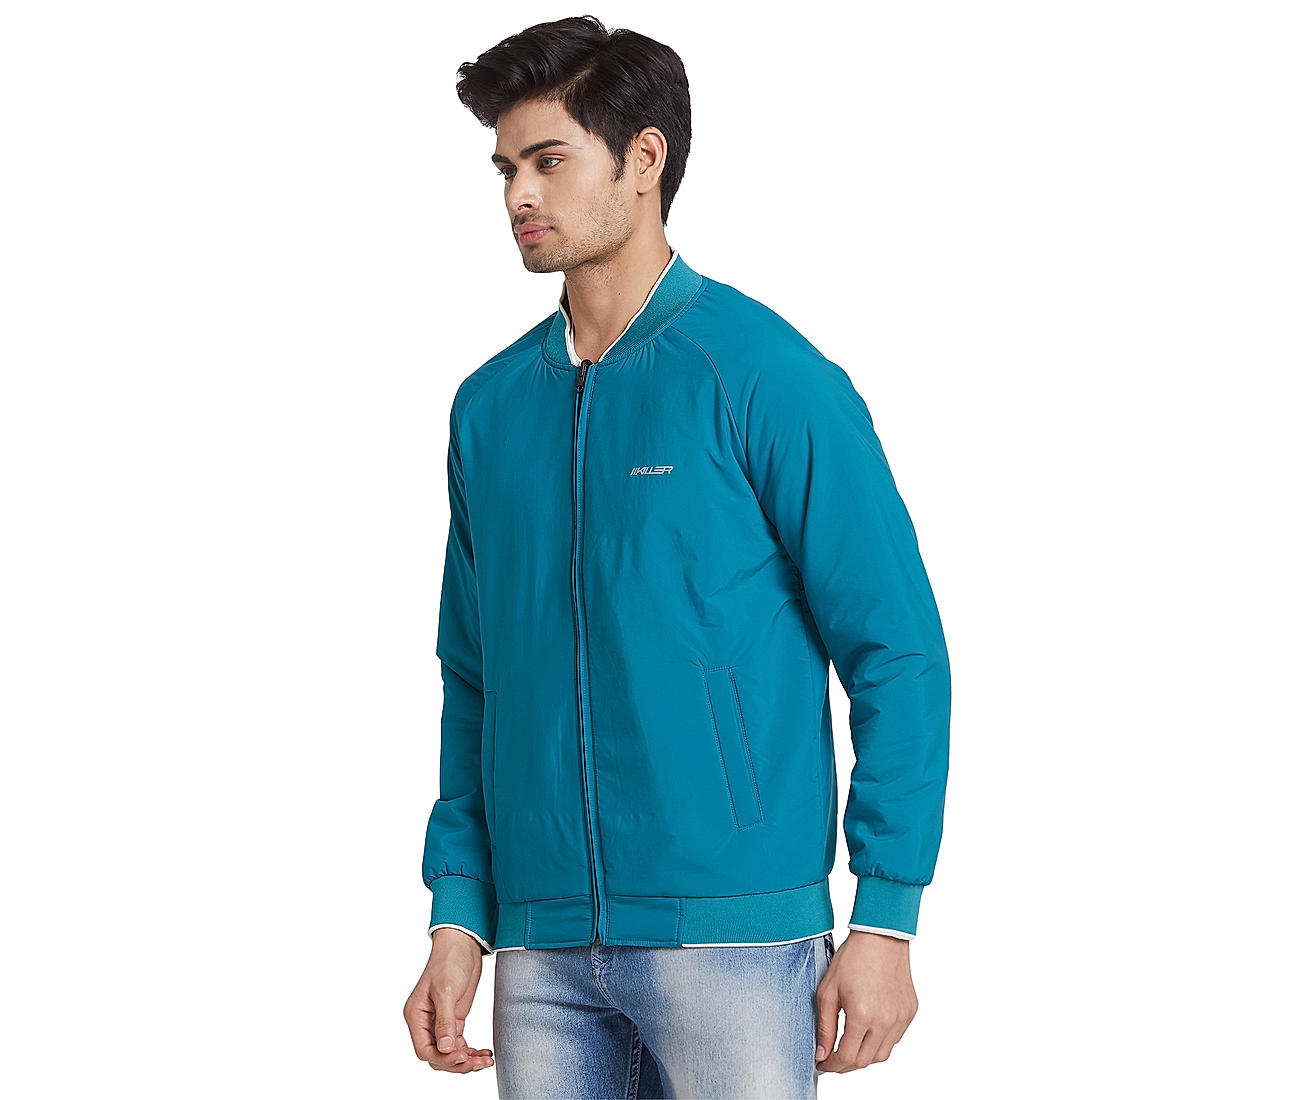 What are good jacket brands in India? - Quora